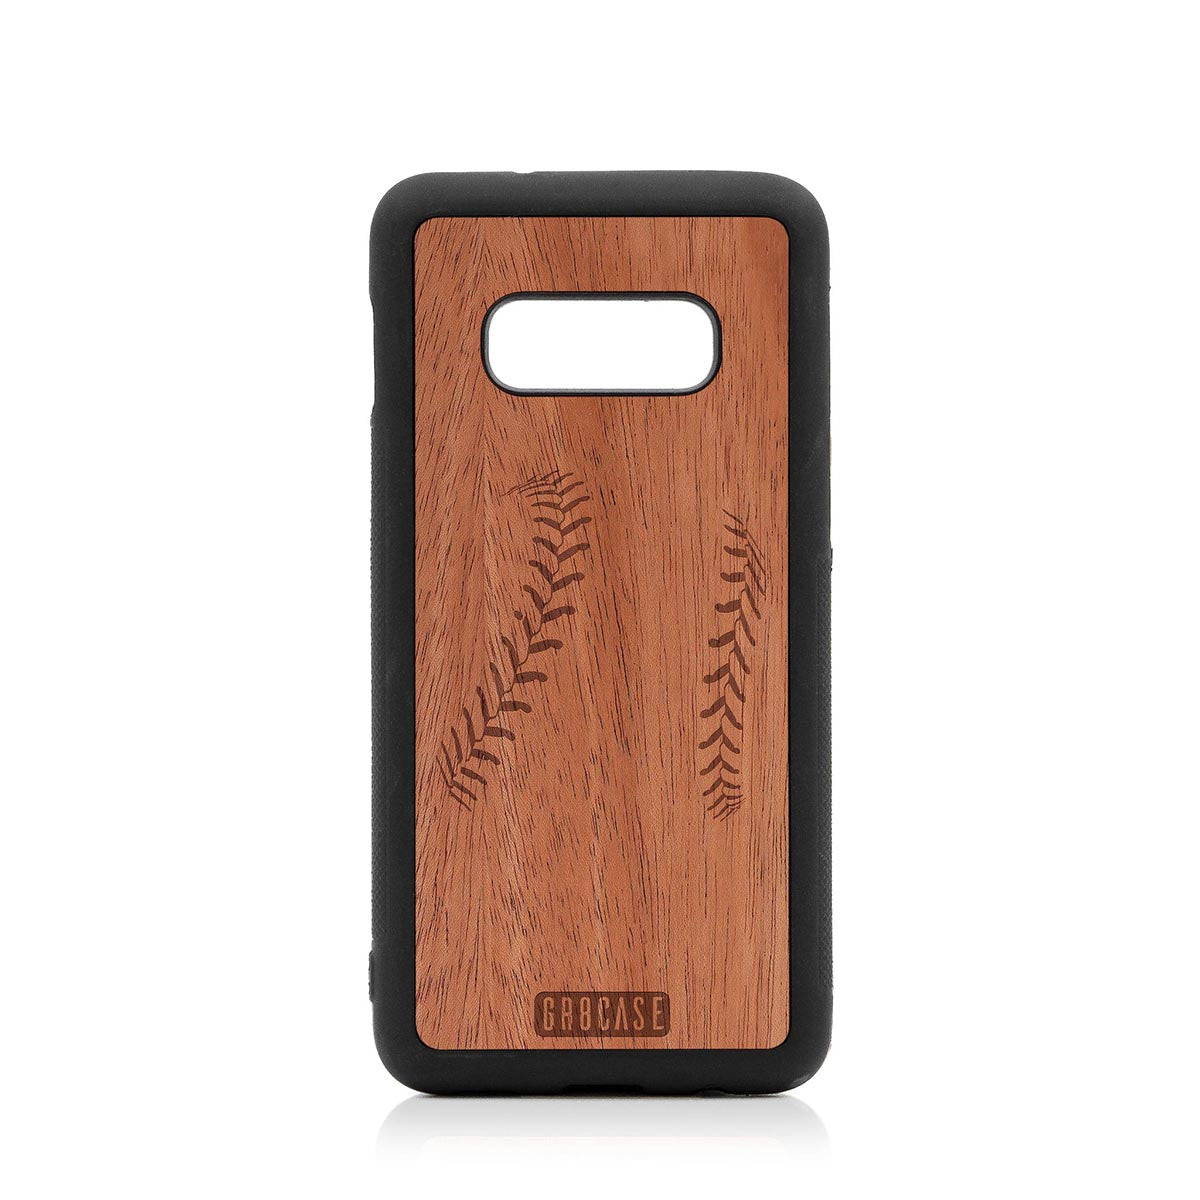 Baseball Stitches Design Wood Case For Samsung Galaxy S10E by GR8CASE